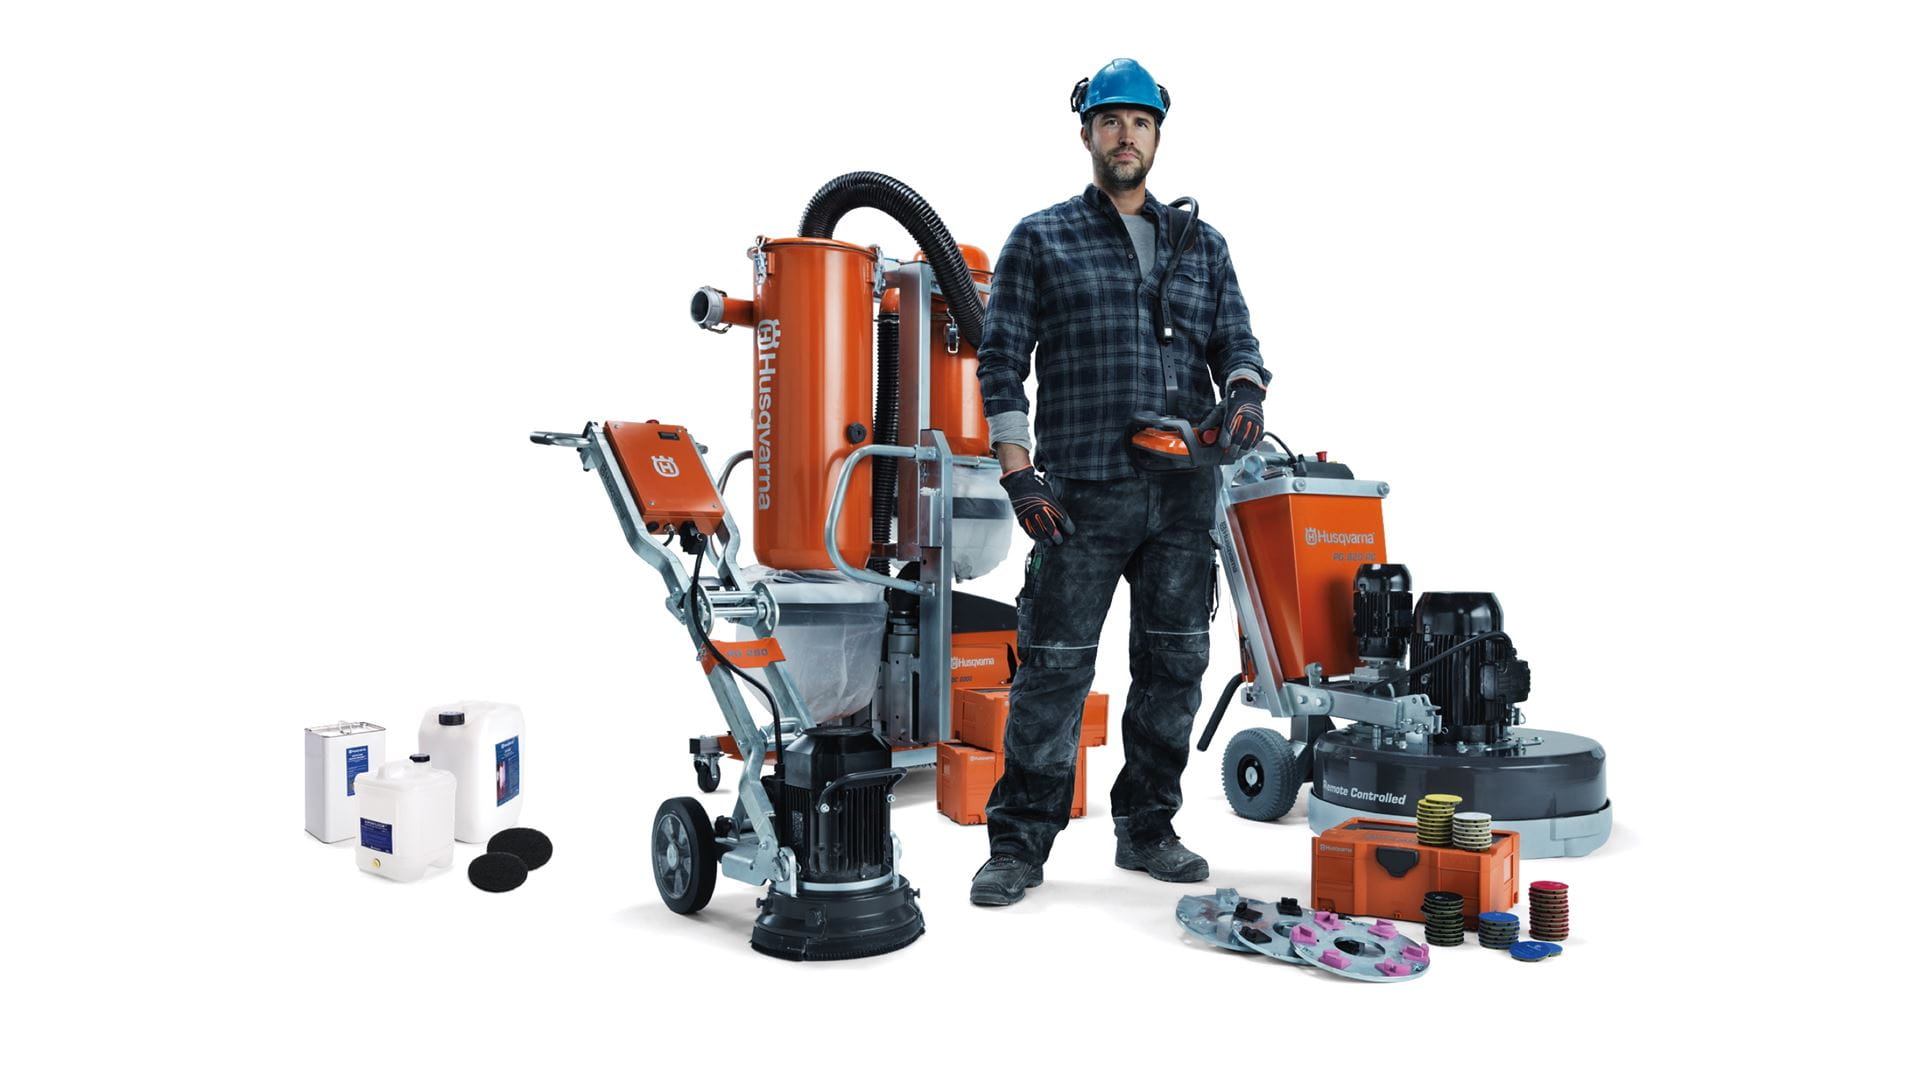 Powerful, efficient and versatile Husqvarna concrete floor grinding system that is easy to transport, set up and use.